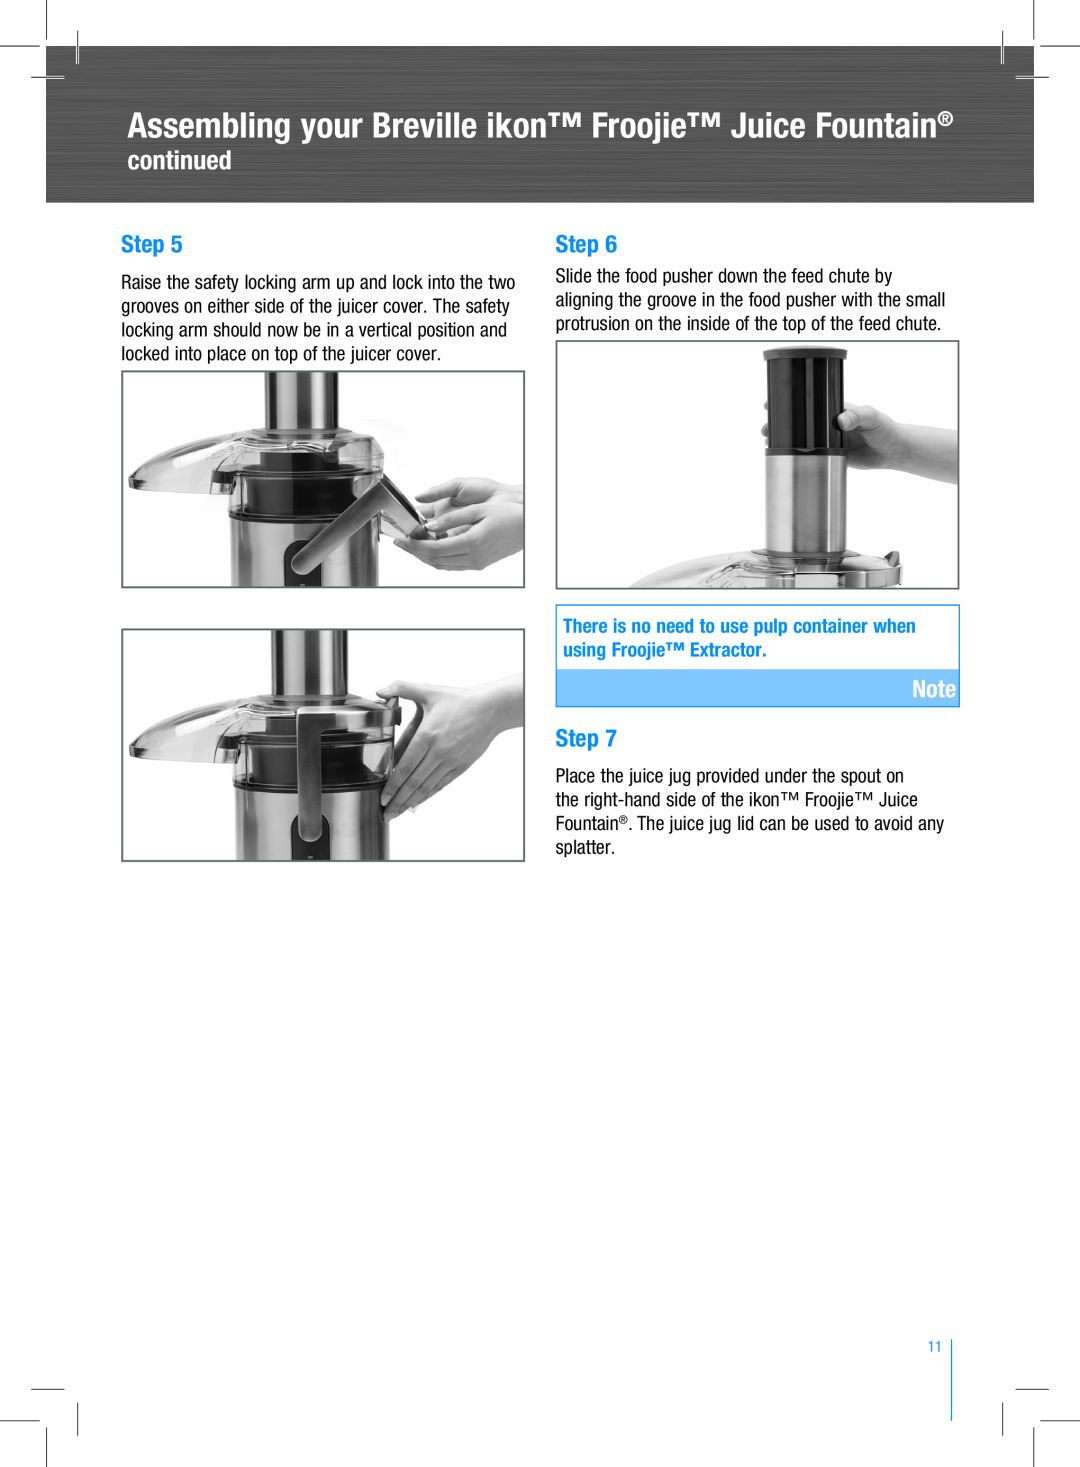 Breville BJE520 manual There is no need to use pulp container when using Froojie Extractor, continued, Step 